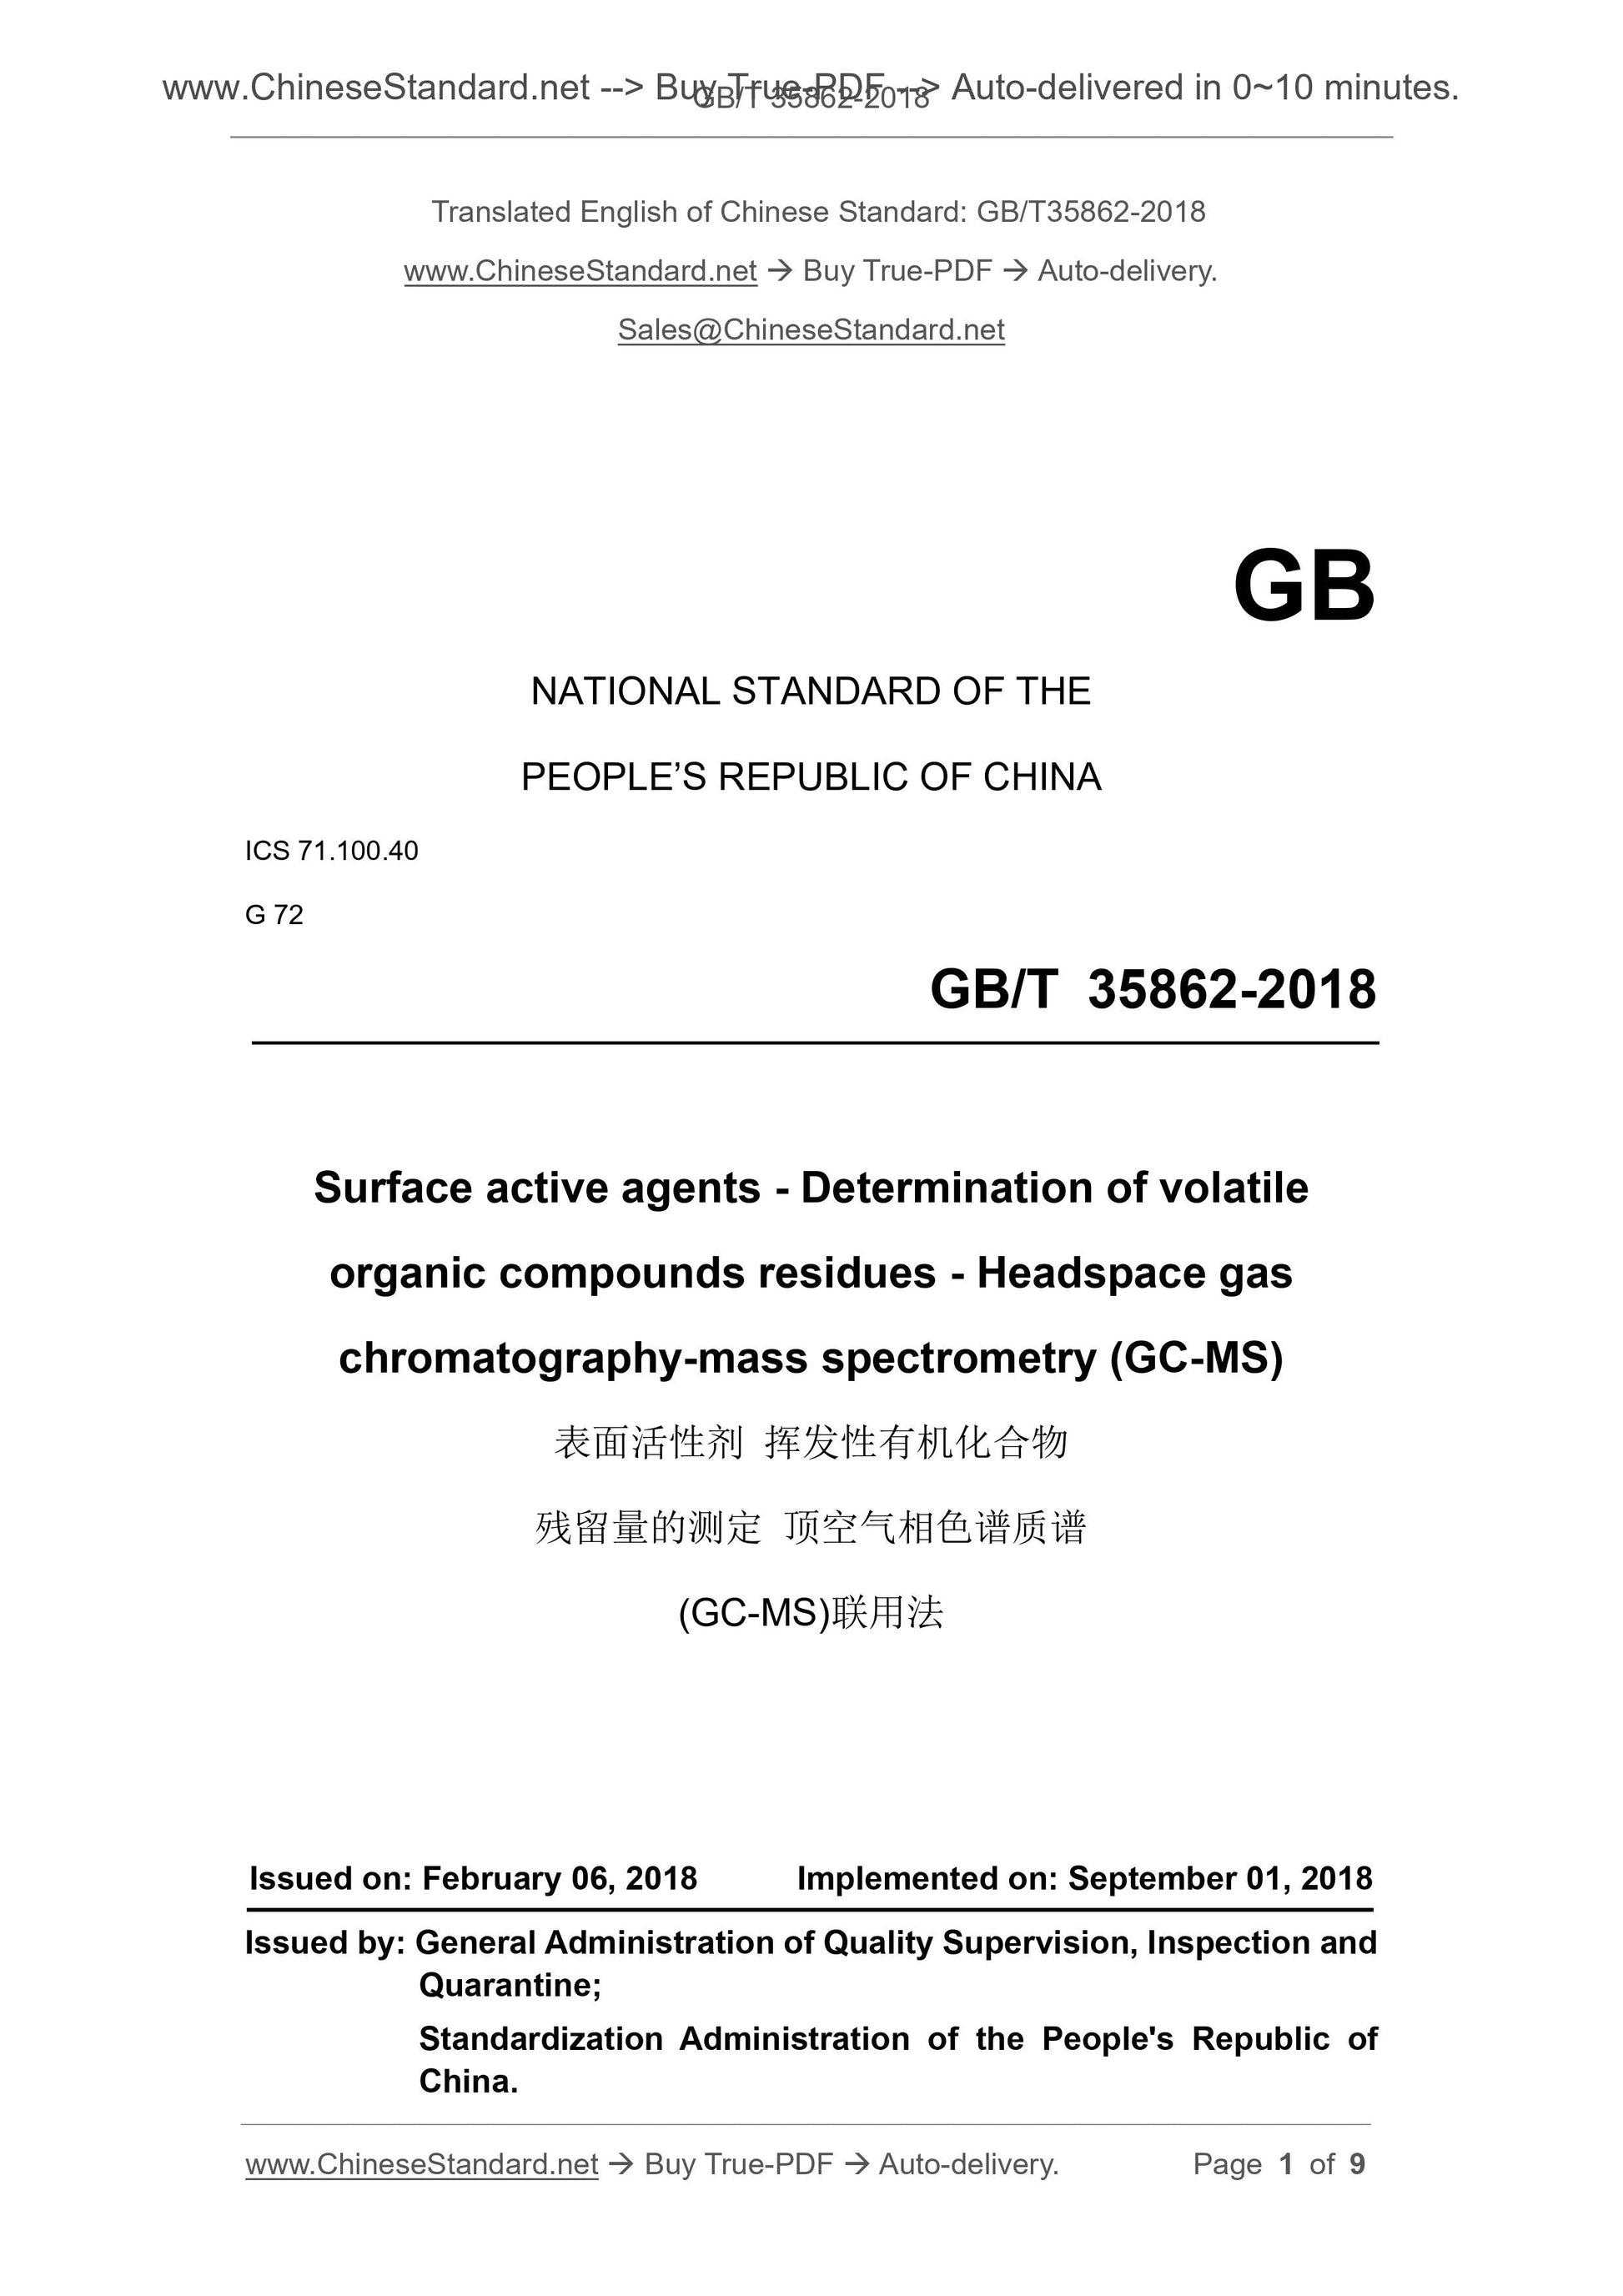 GB/T 35862-2018 Page 1